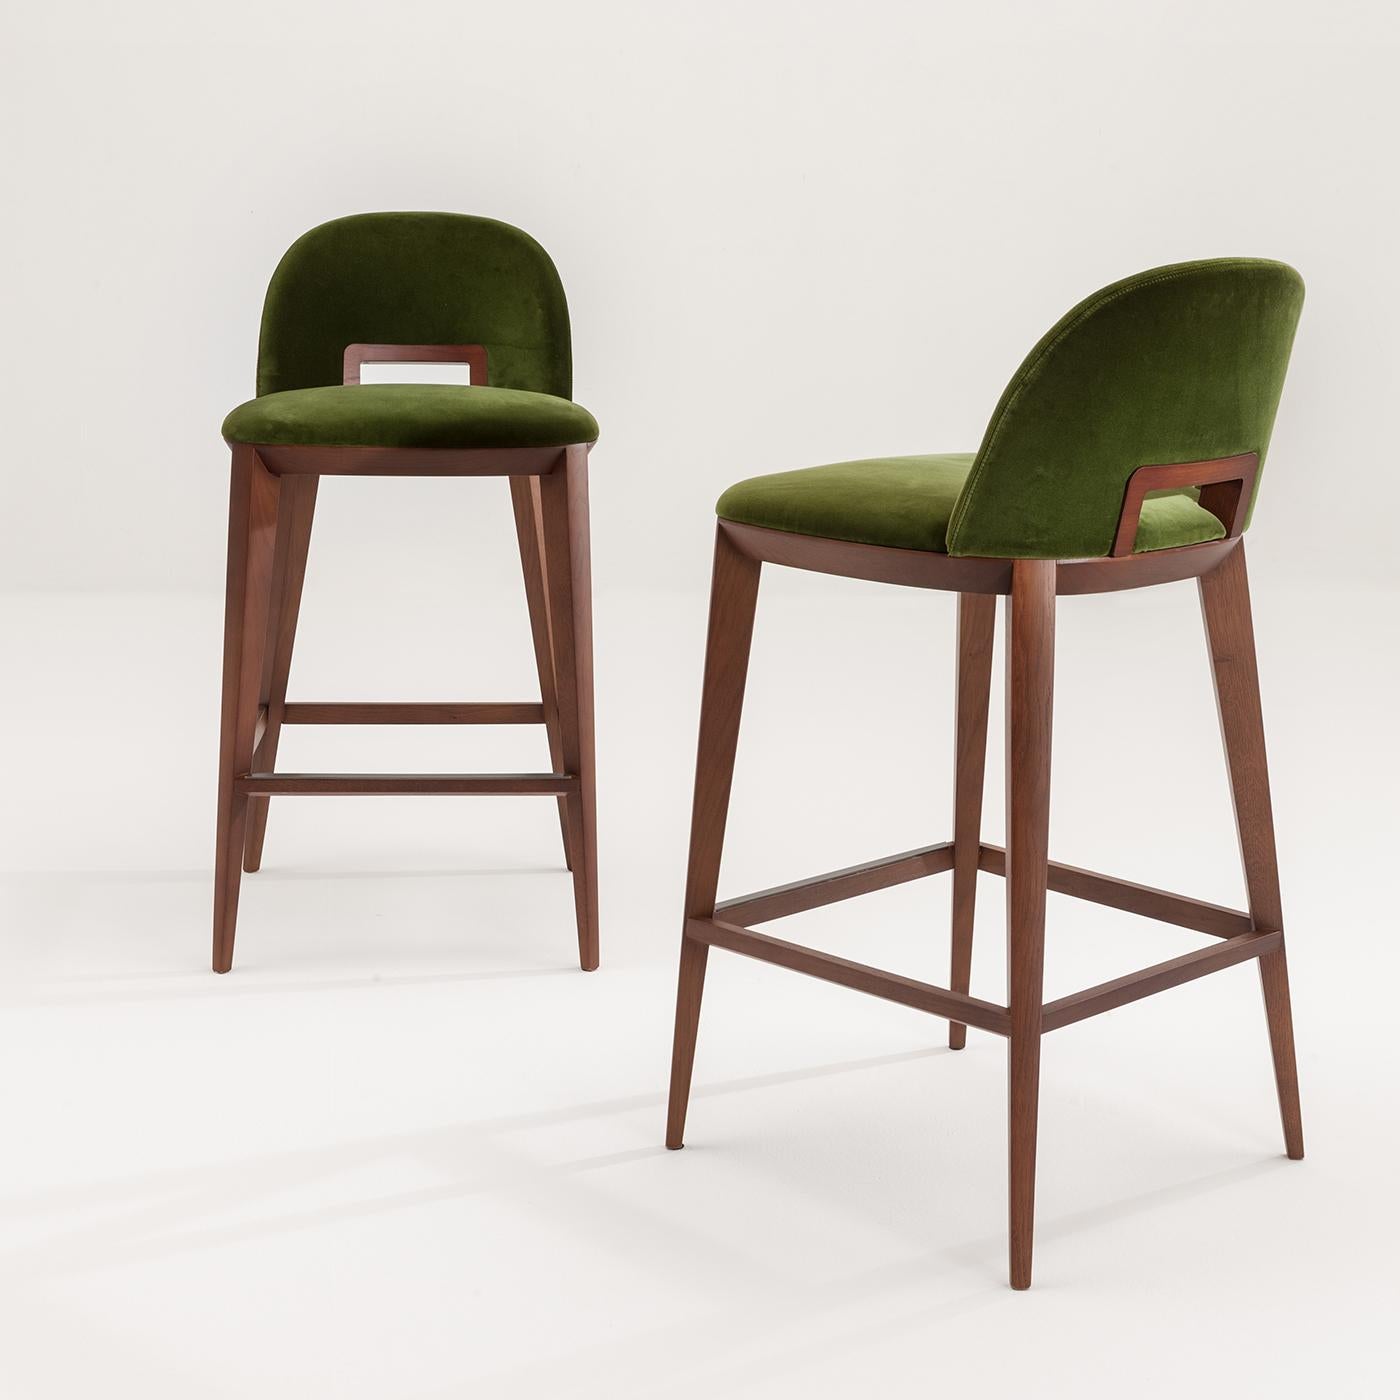 The Margaret Stool, in green velvet, has long, slender legs that intersect with the seat and backrest providing harmony and appeal. With a frame and handle in oak, the wood may be stained in rosewood, teak, wengè, black walnut, walnut and oak. The